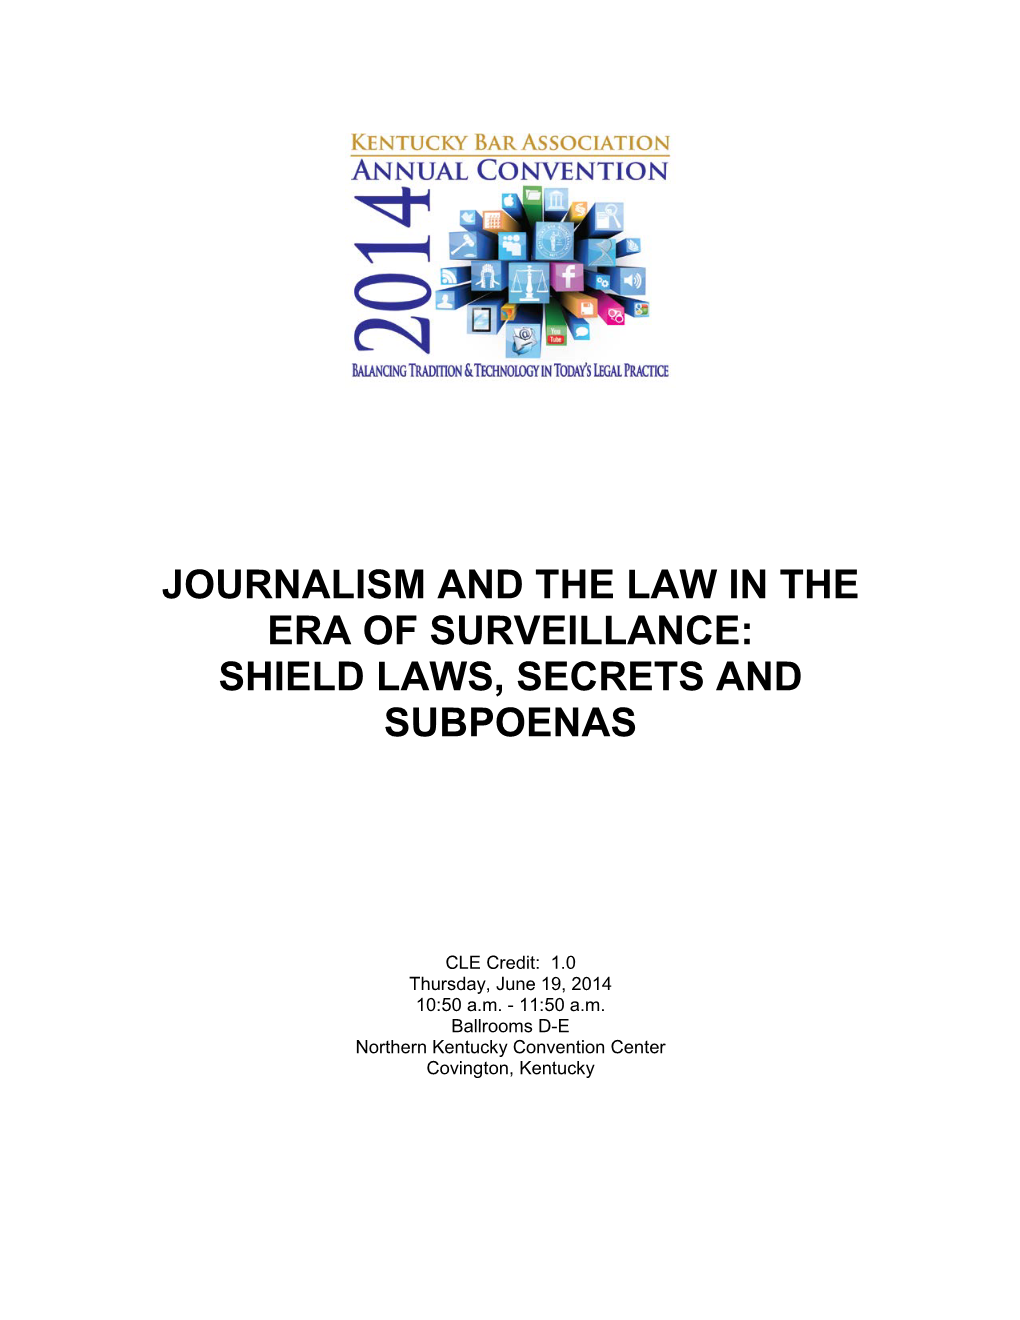 Journalism and the Law in the Era of Surveillance: Shield Laws, Secrets and Subpoenas